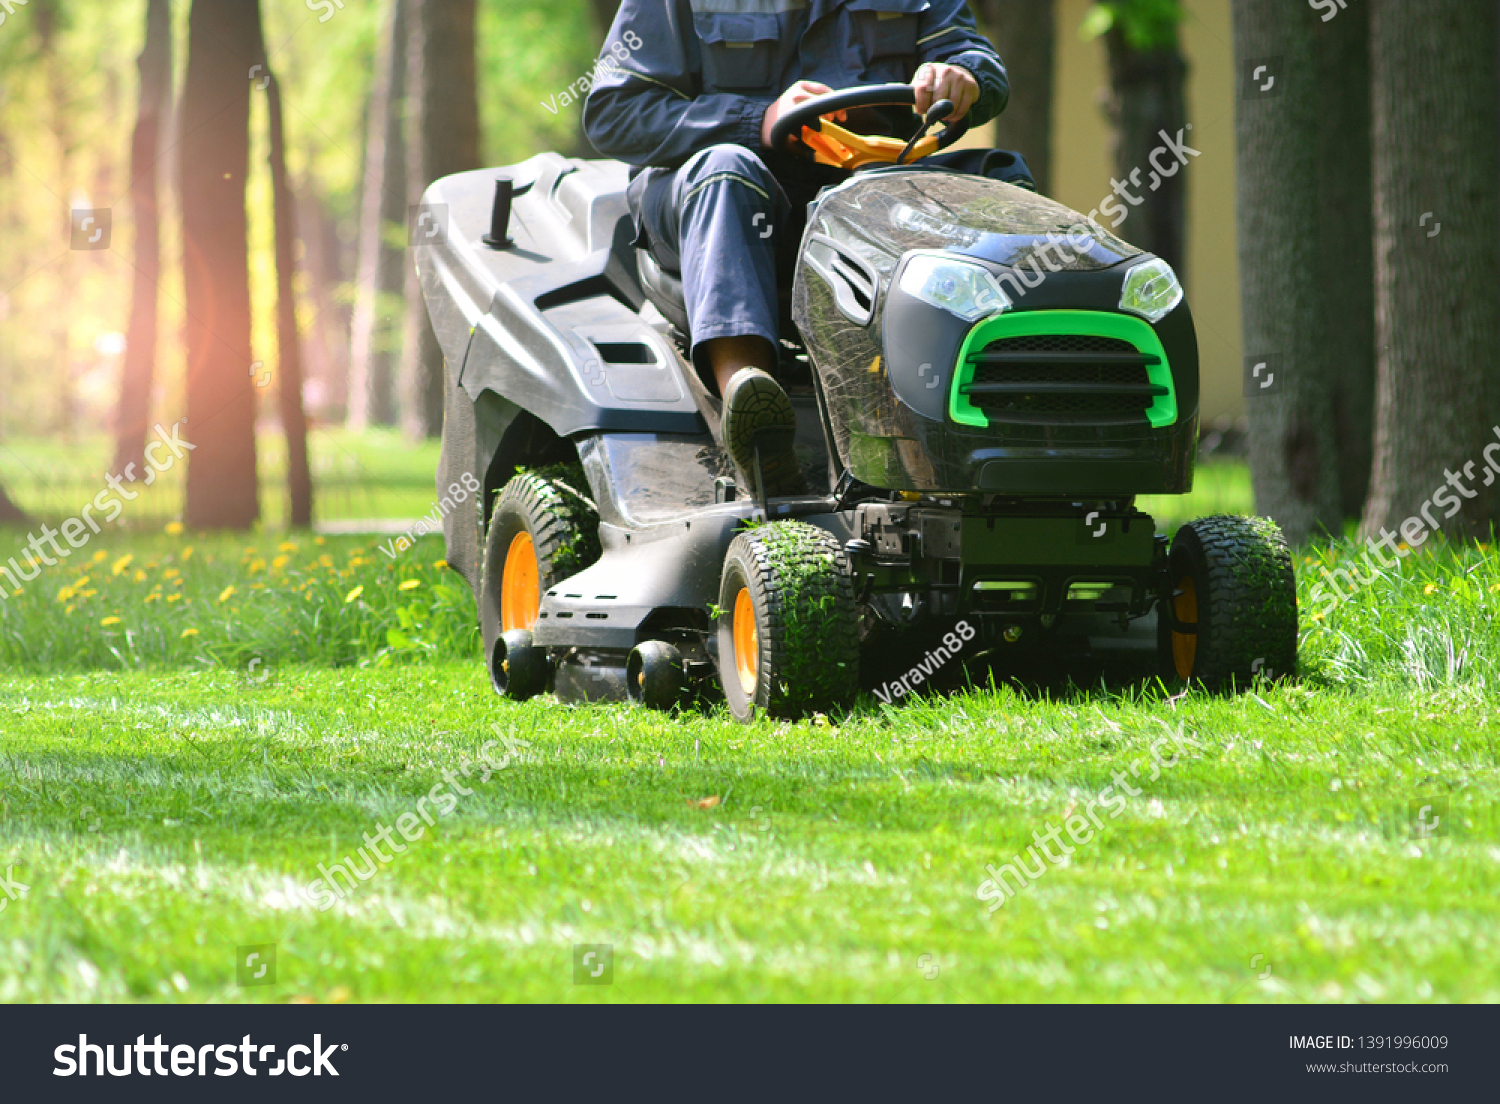 Professional lawn mower with worker cutting the grass in a garden #1391996009